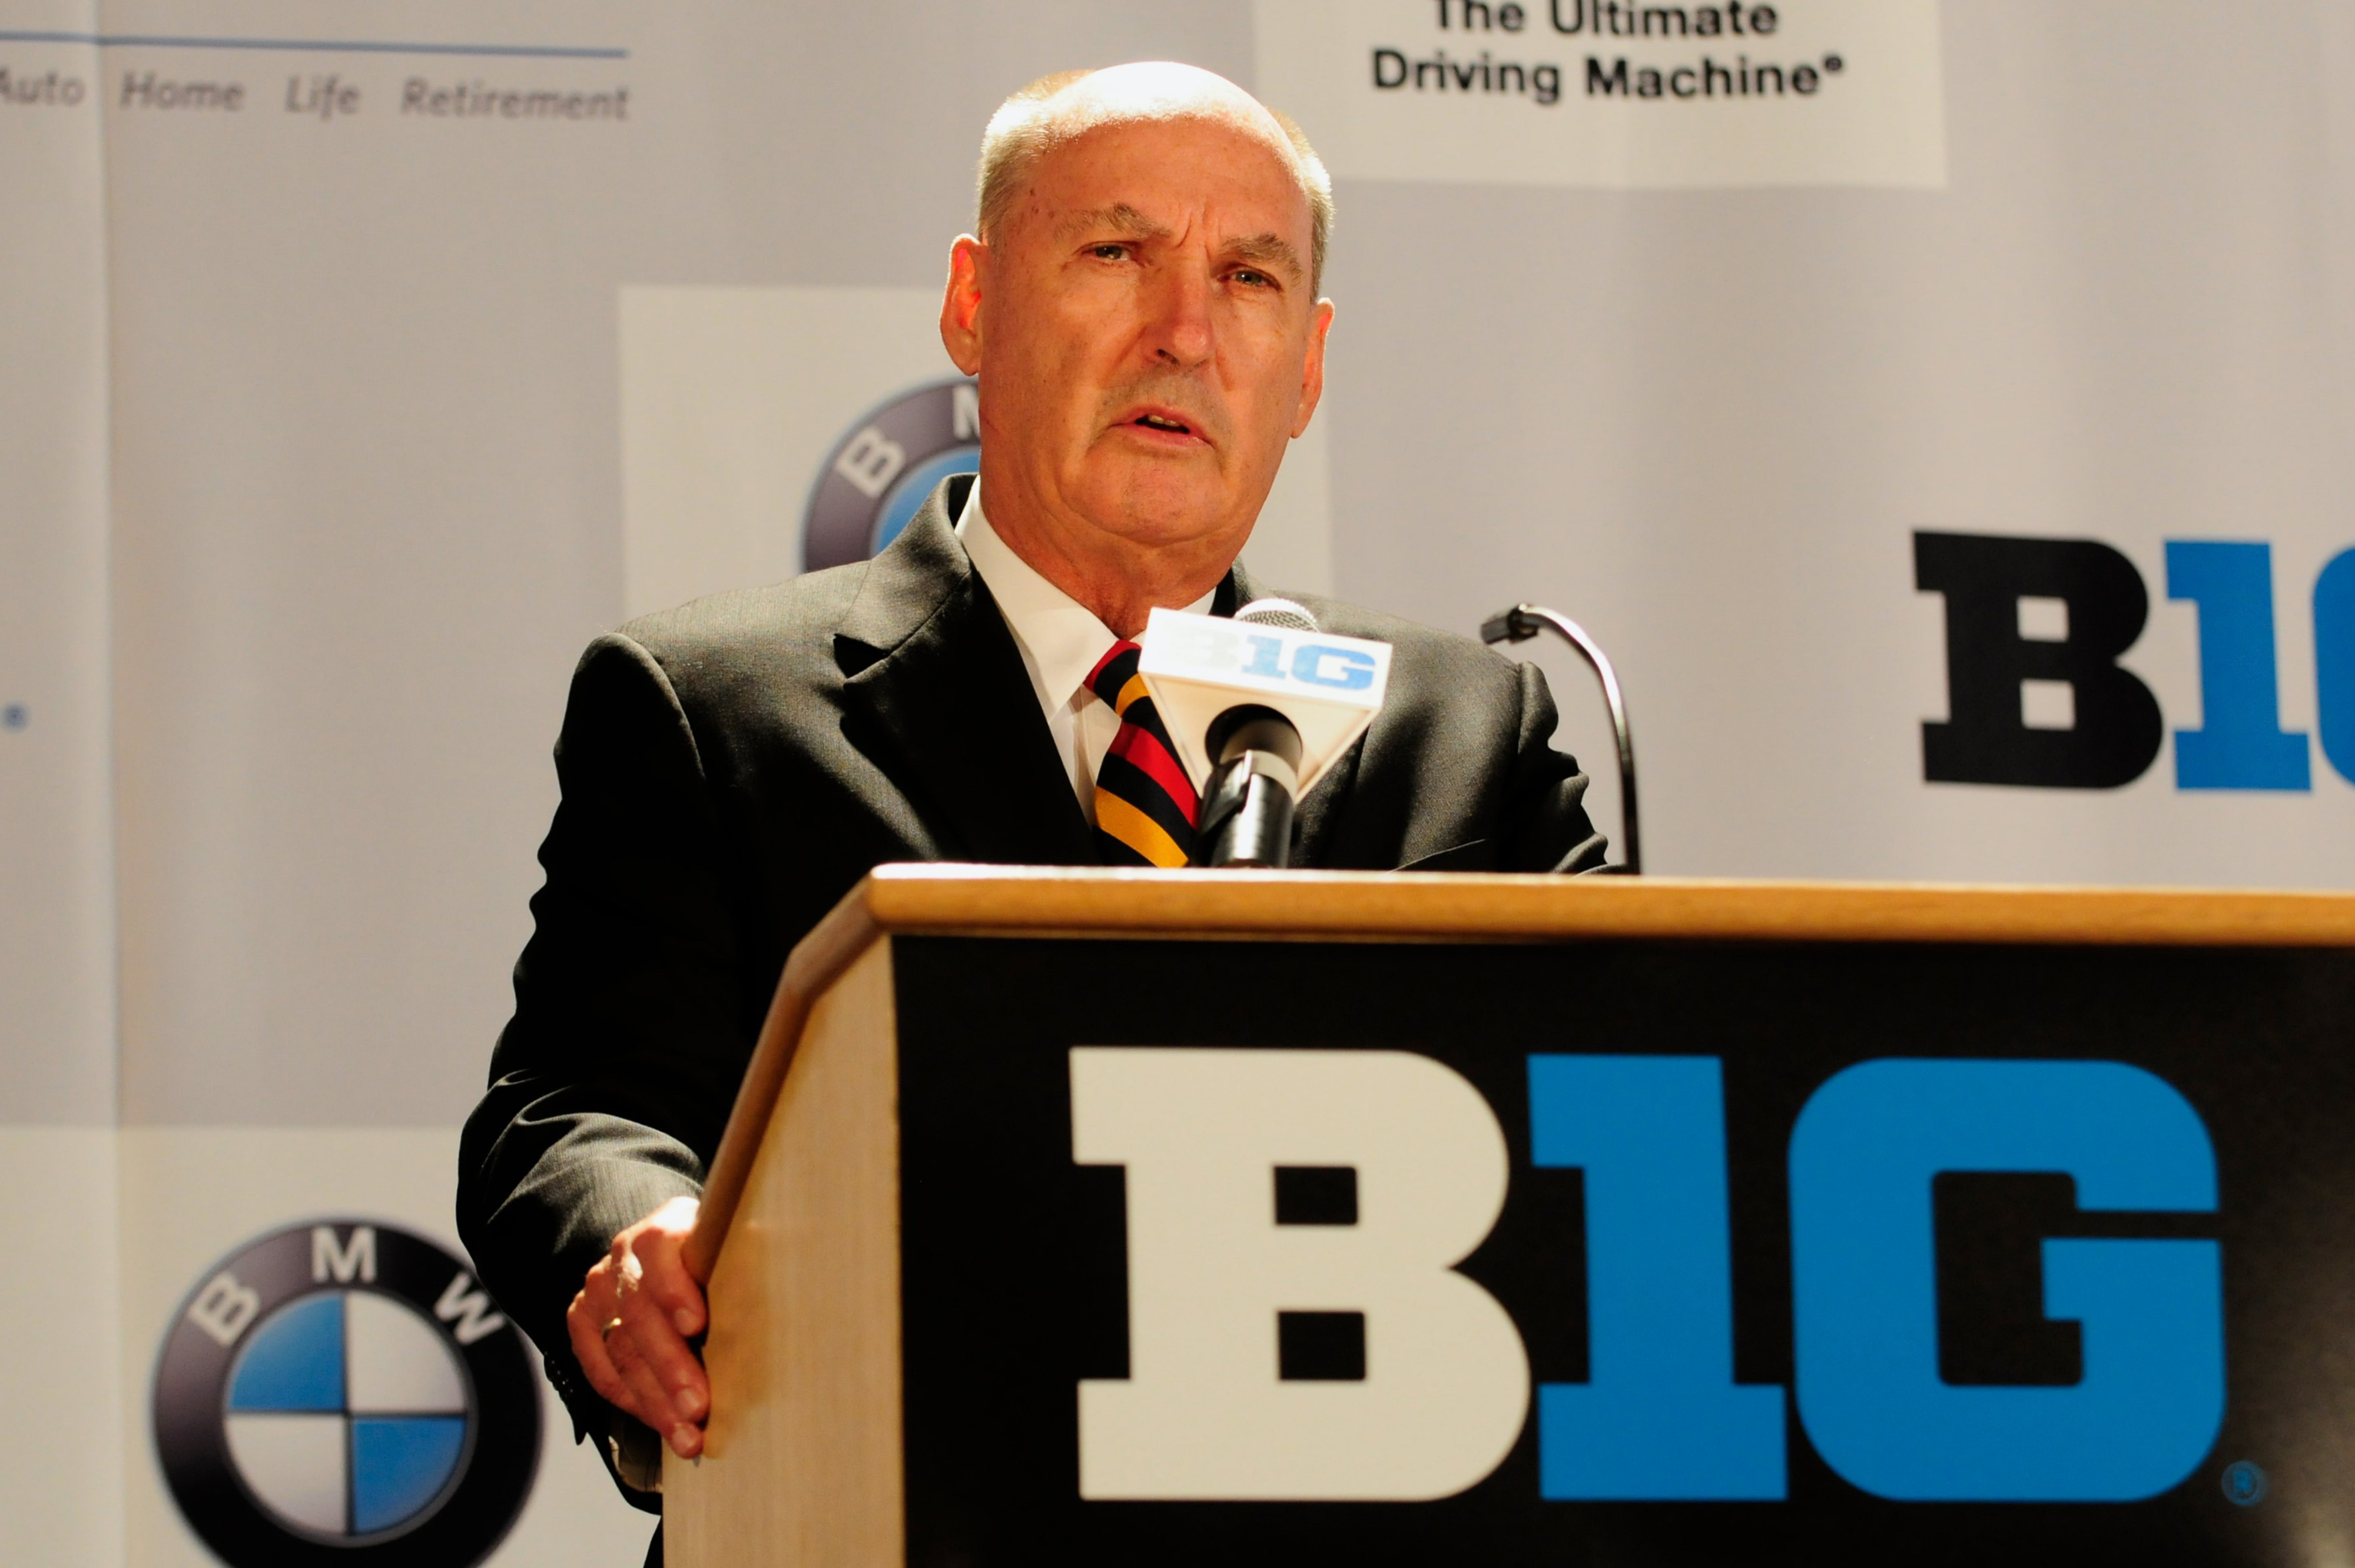 There's no good pictures of Big East commish Val Ackerman, so here's B1G commish Jim Delany.